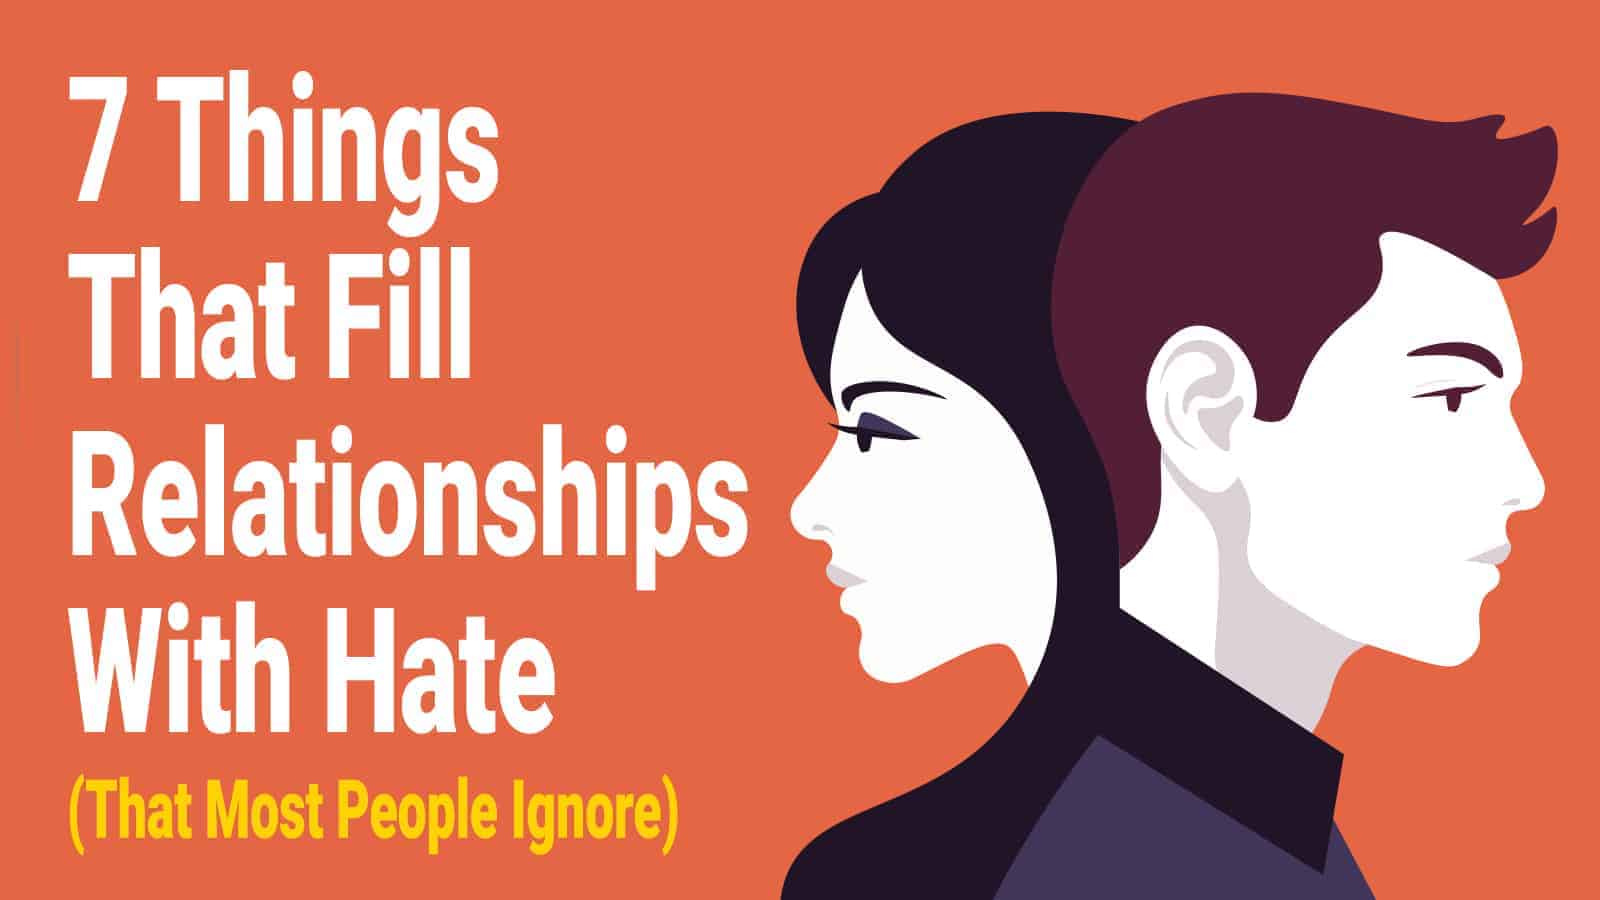 7 Things That Fill Relationships With Hate (That Most People Ignore)